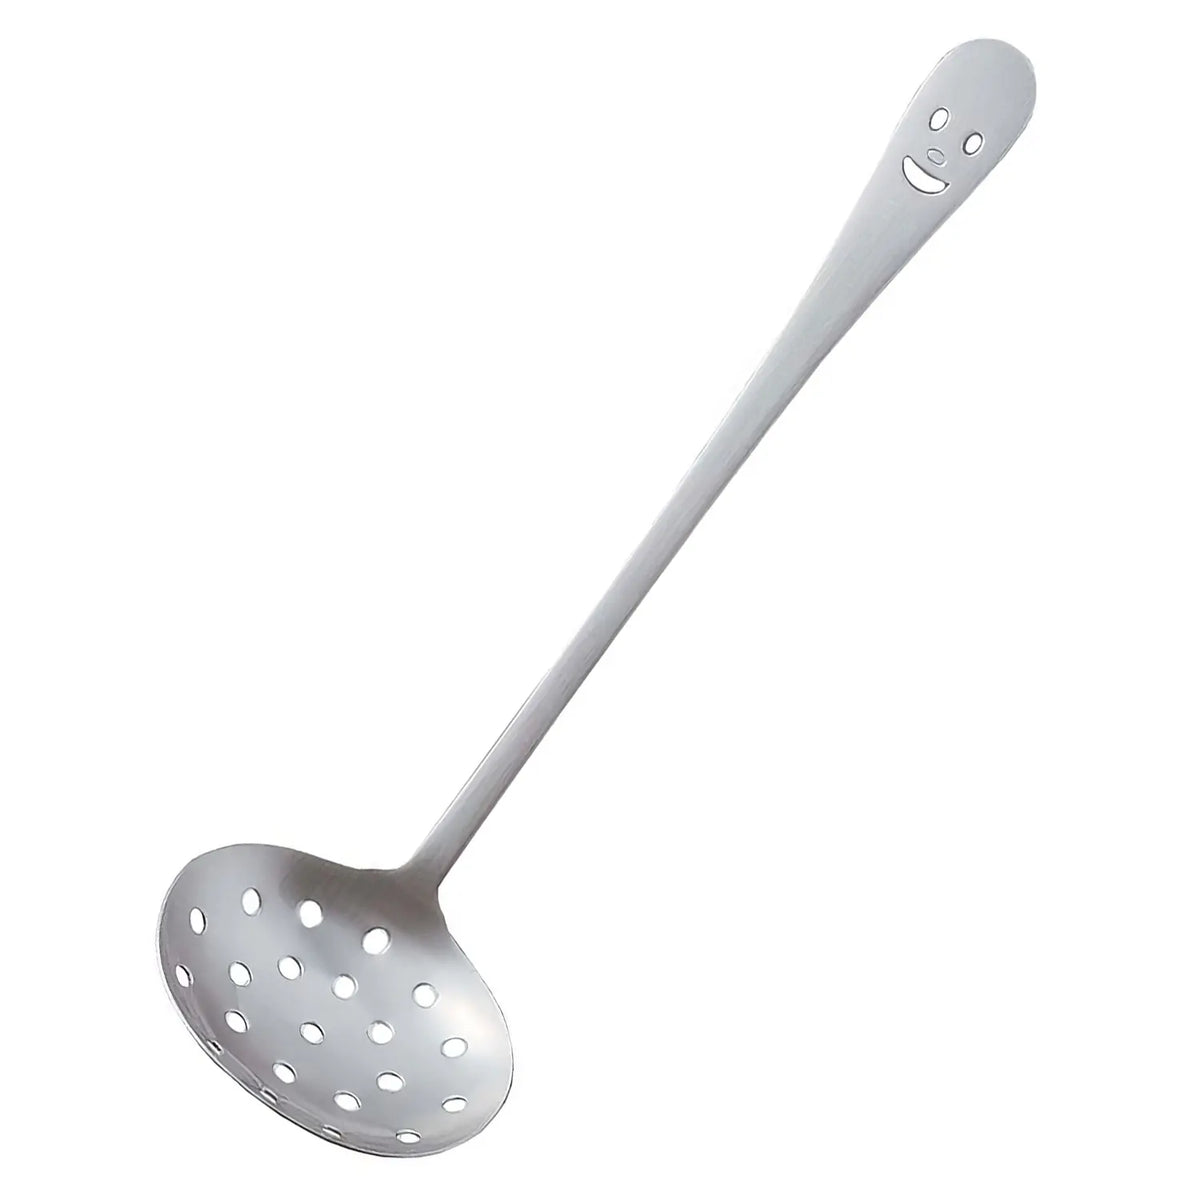 Wada NICO Stainless Steel Perforated Ladle 6.5cm